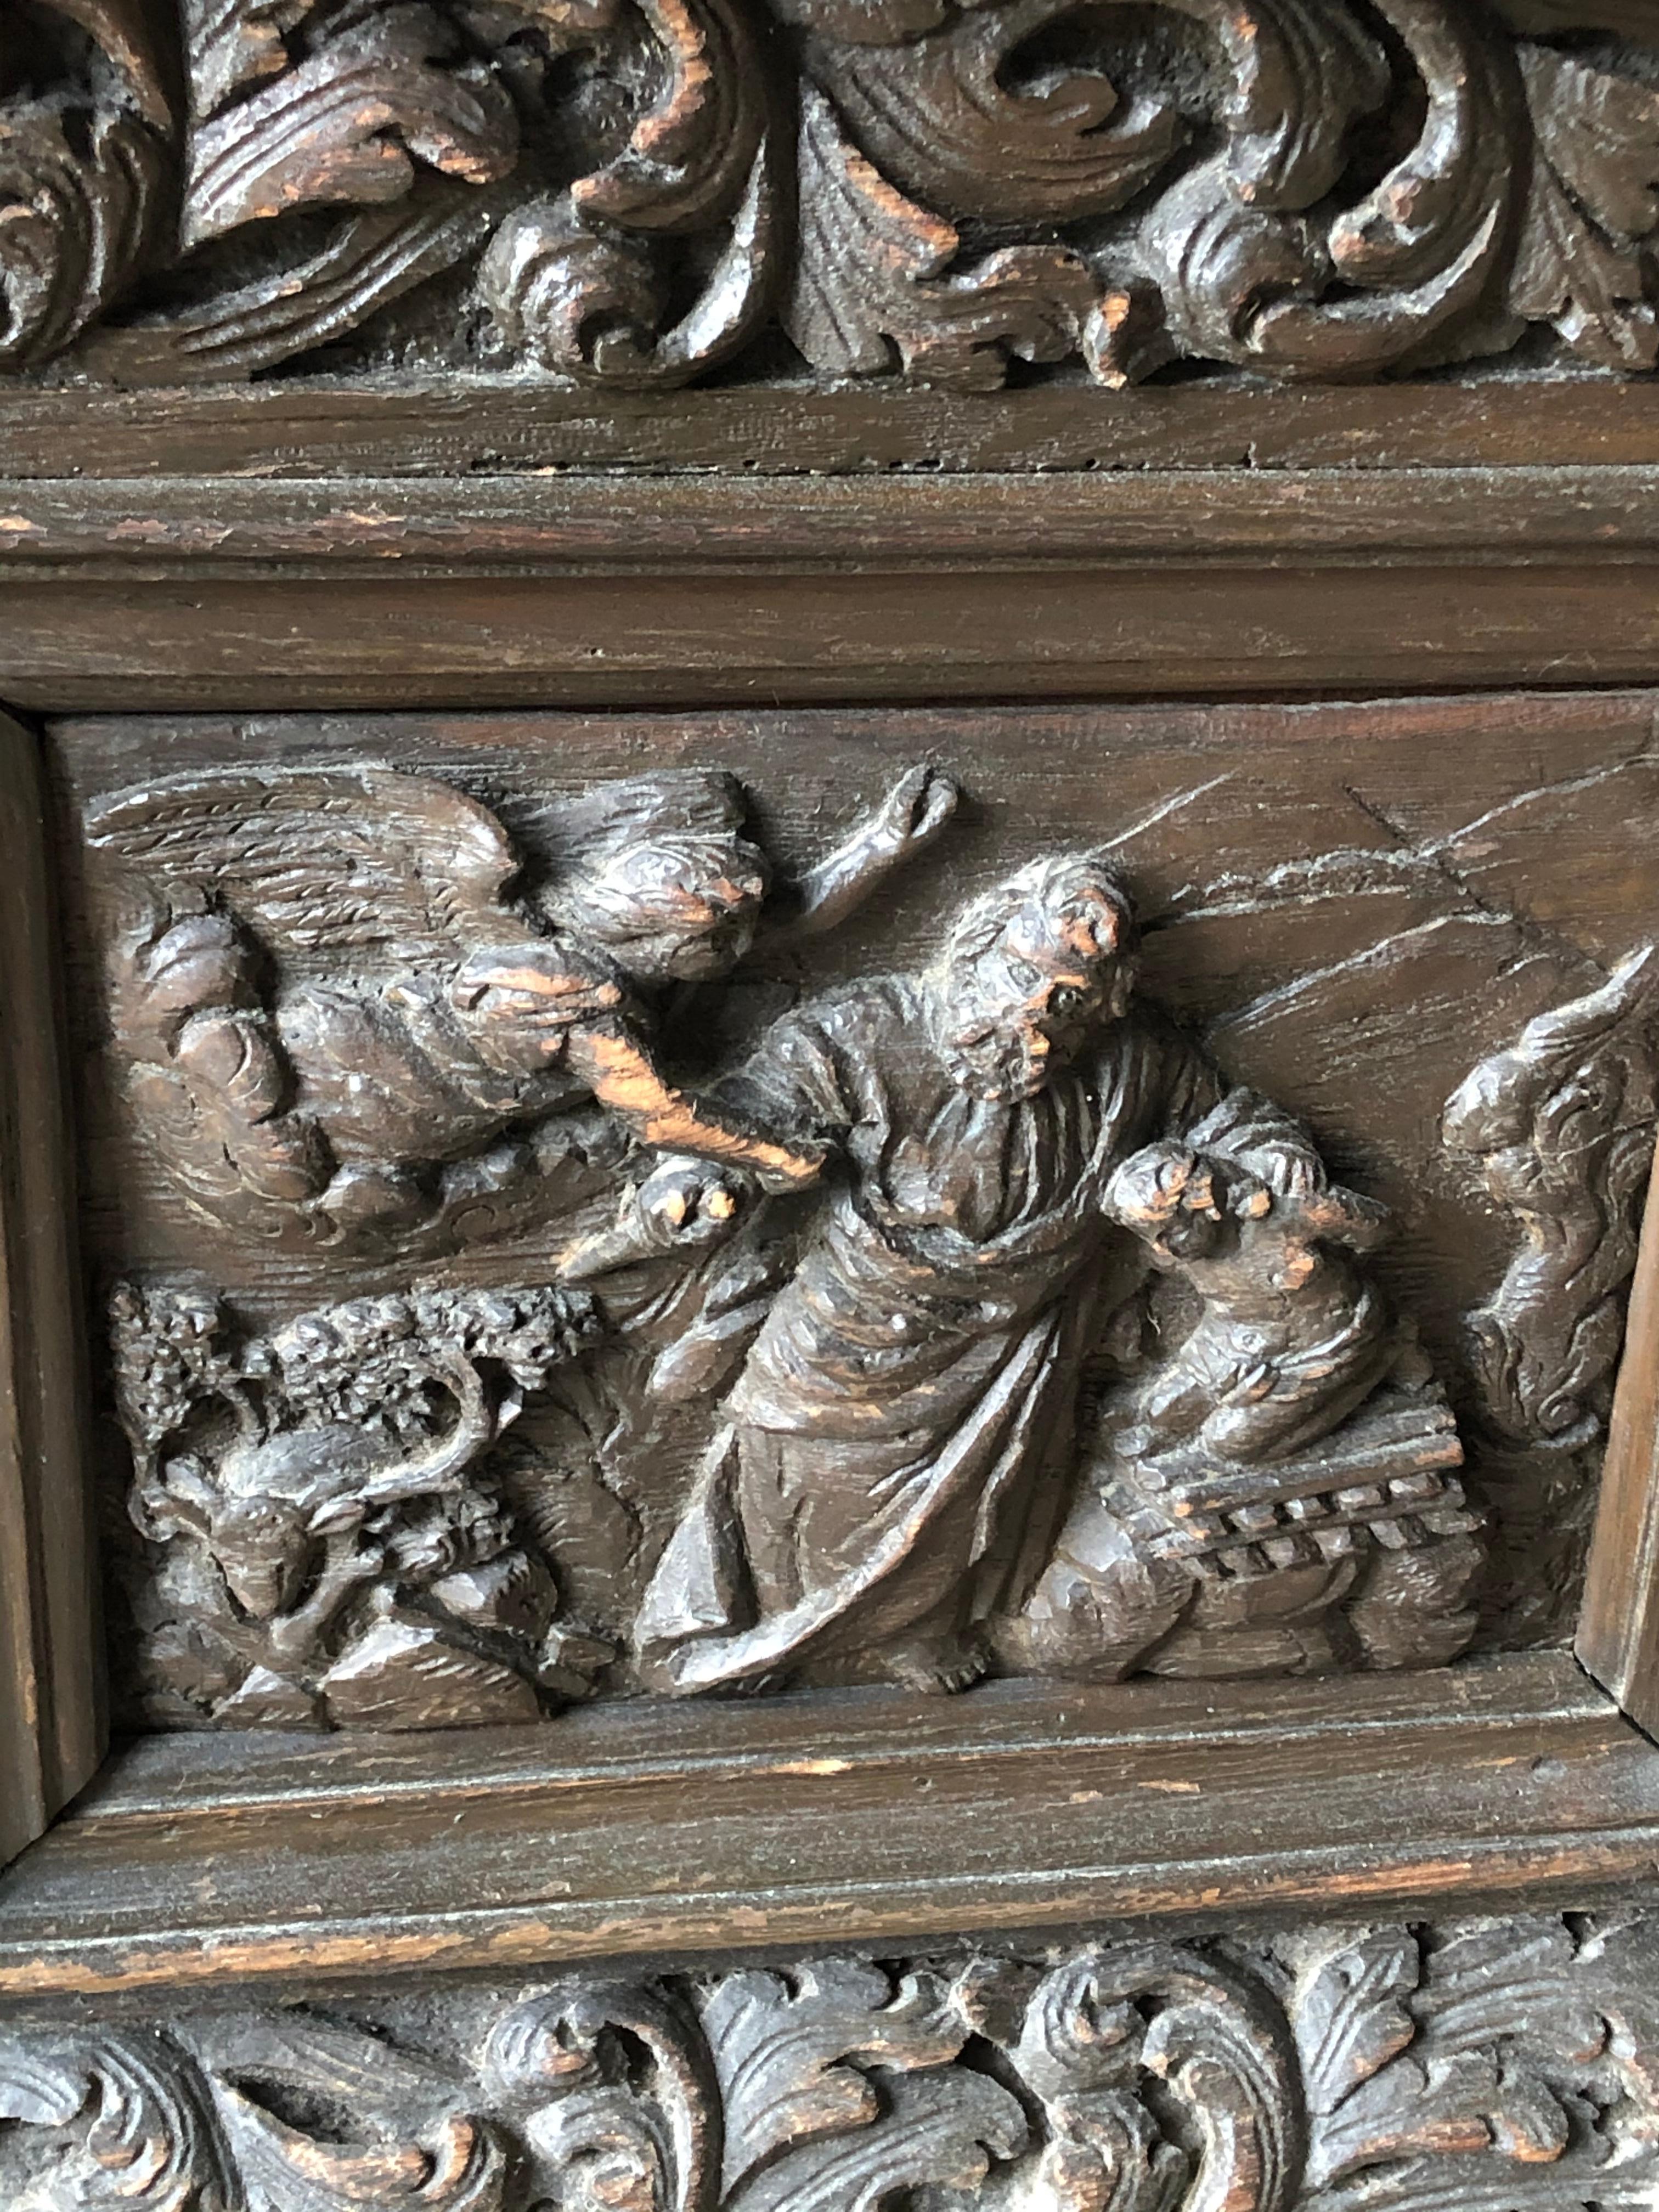 An 18th century Flemish chest with lid, in dark stained oak, elaborately carved with Biblical scenes (Lot feeing Sodom and Gomorrah, Angel staying the hand of Abraham’s sacrifice.). The box retains its original iron lock and key.